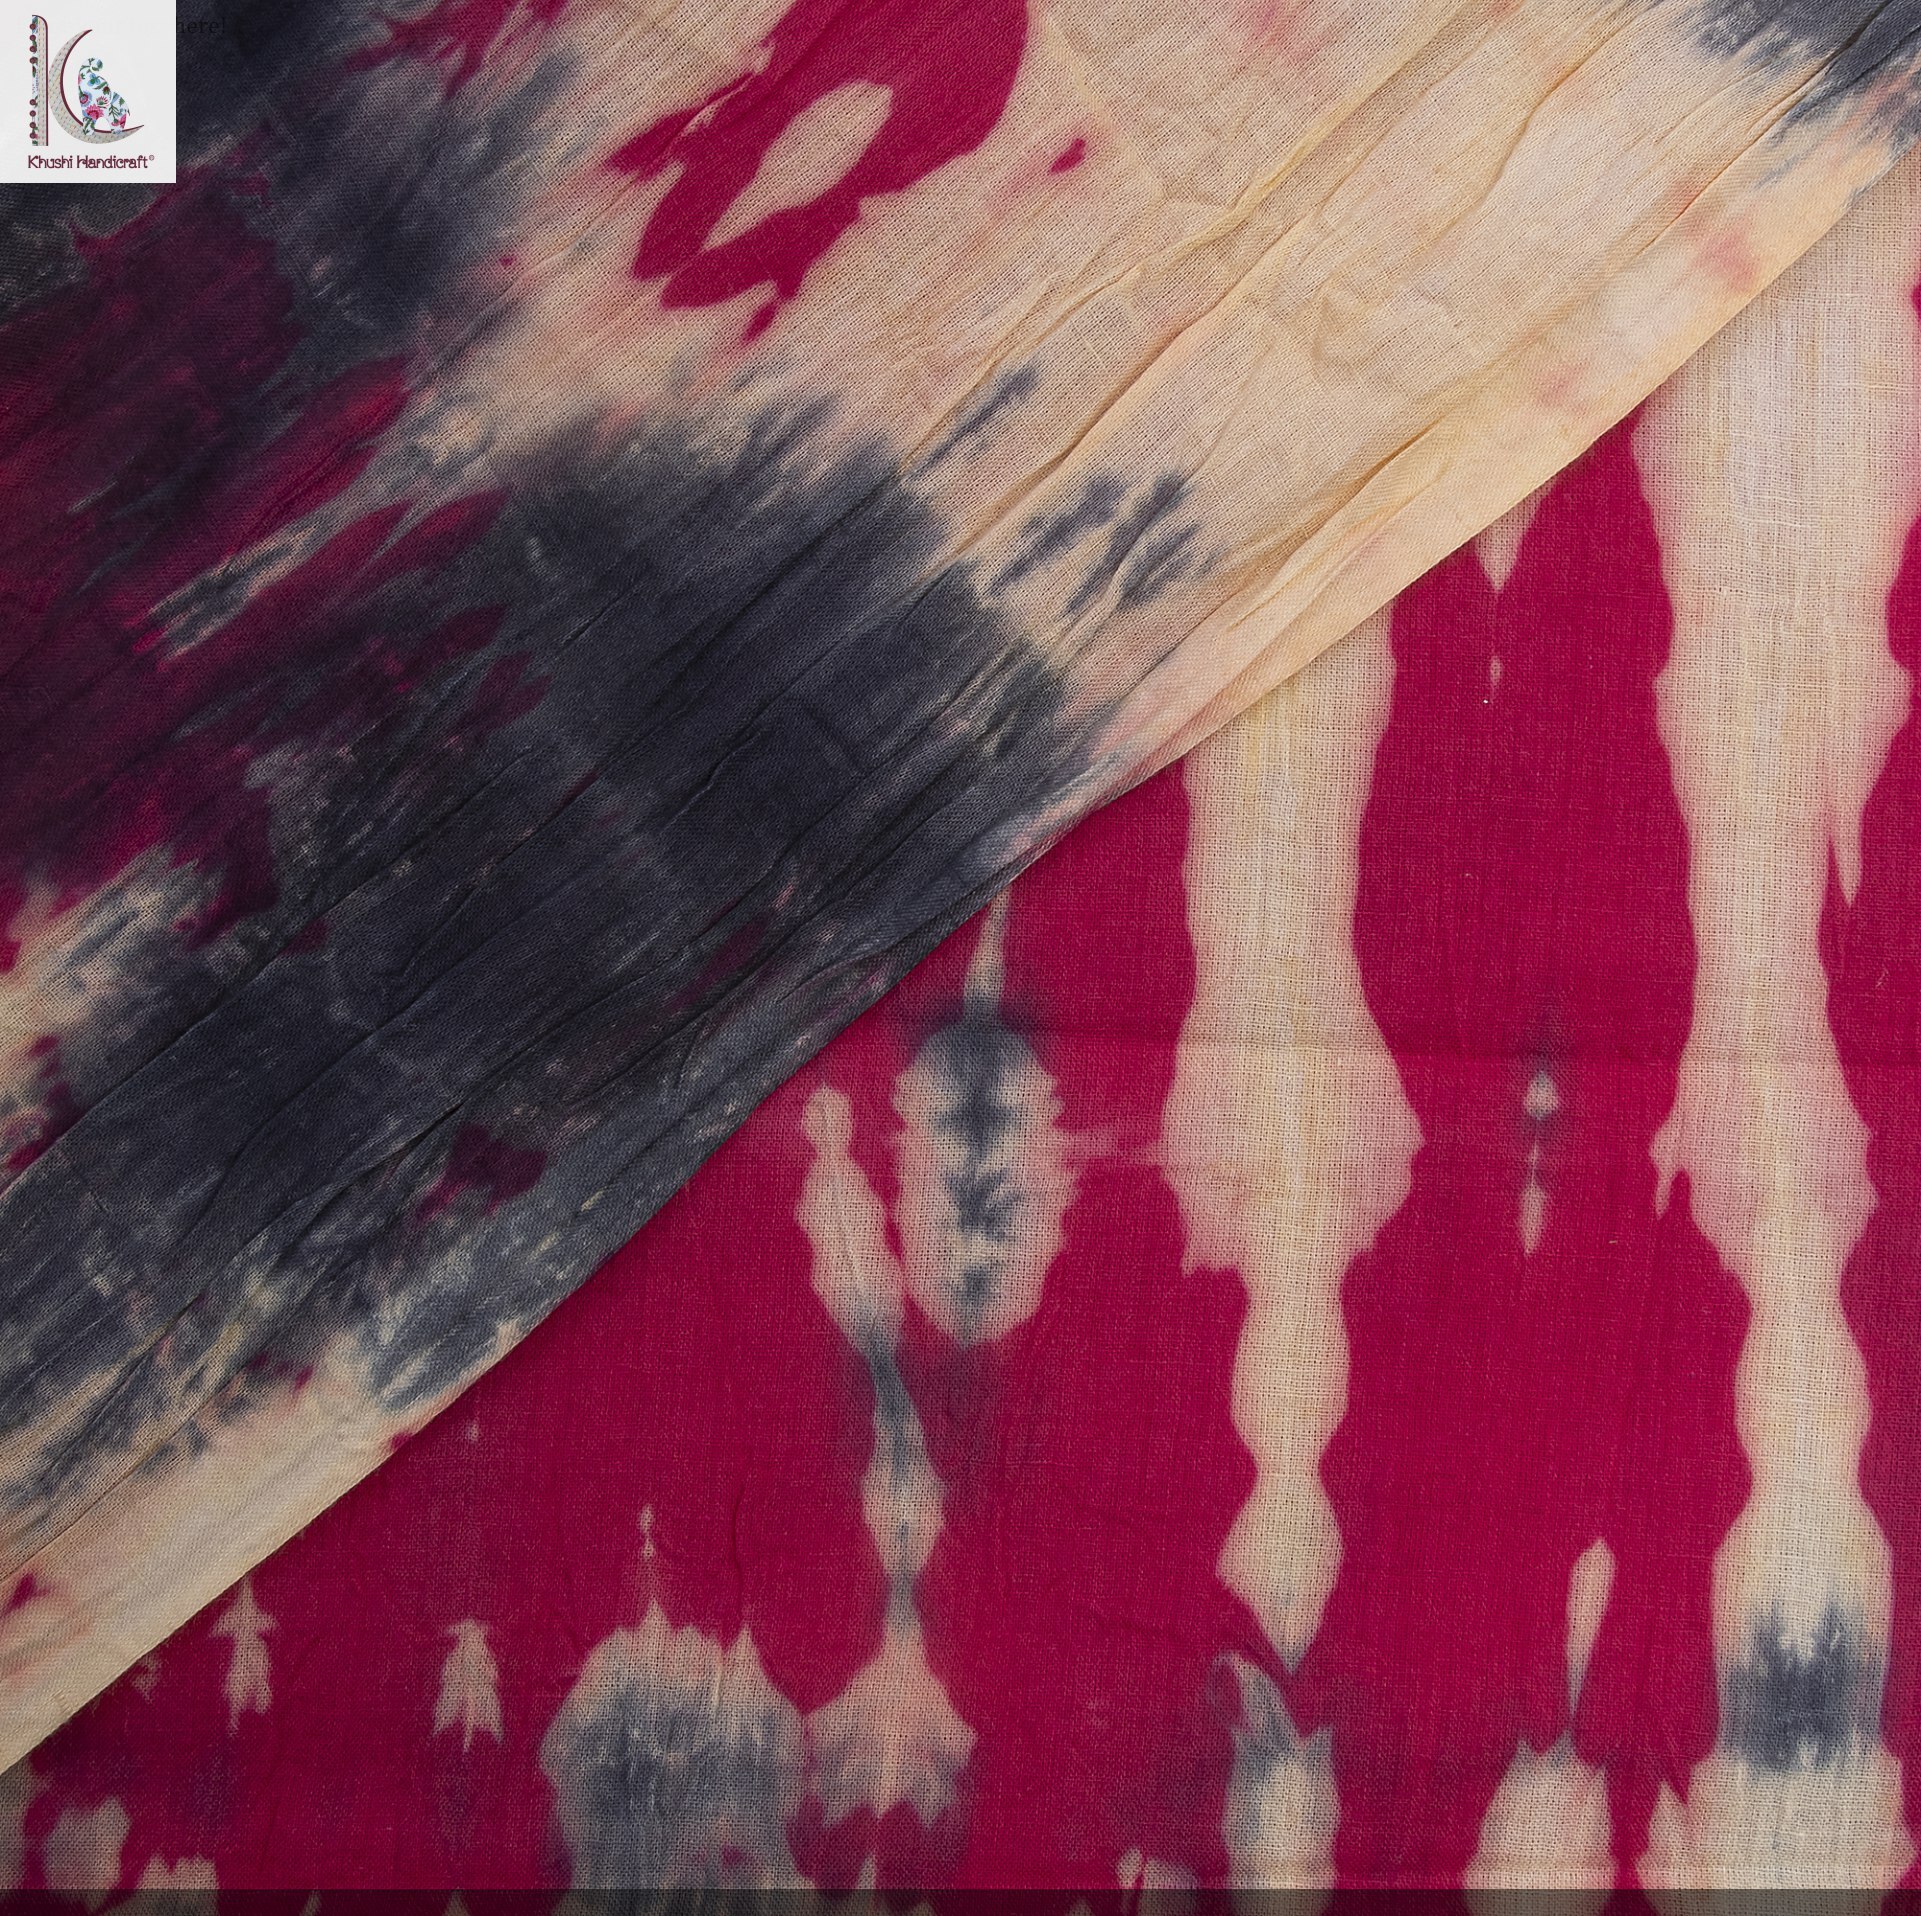 RED COTTON TIE DYE FABRIC